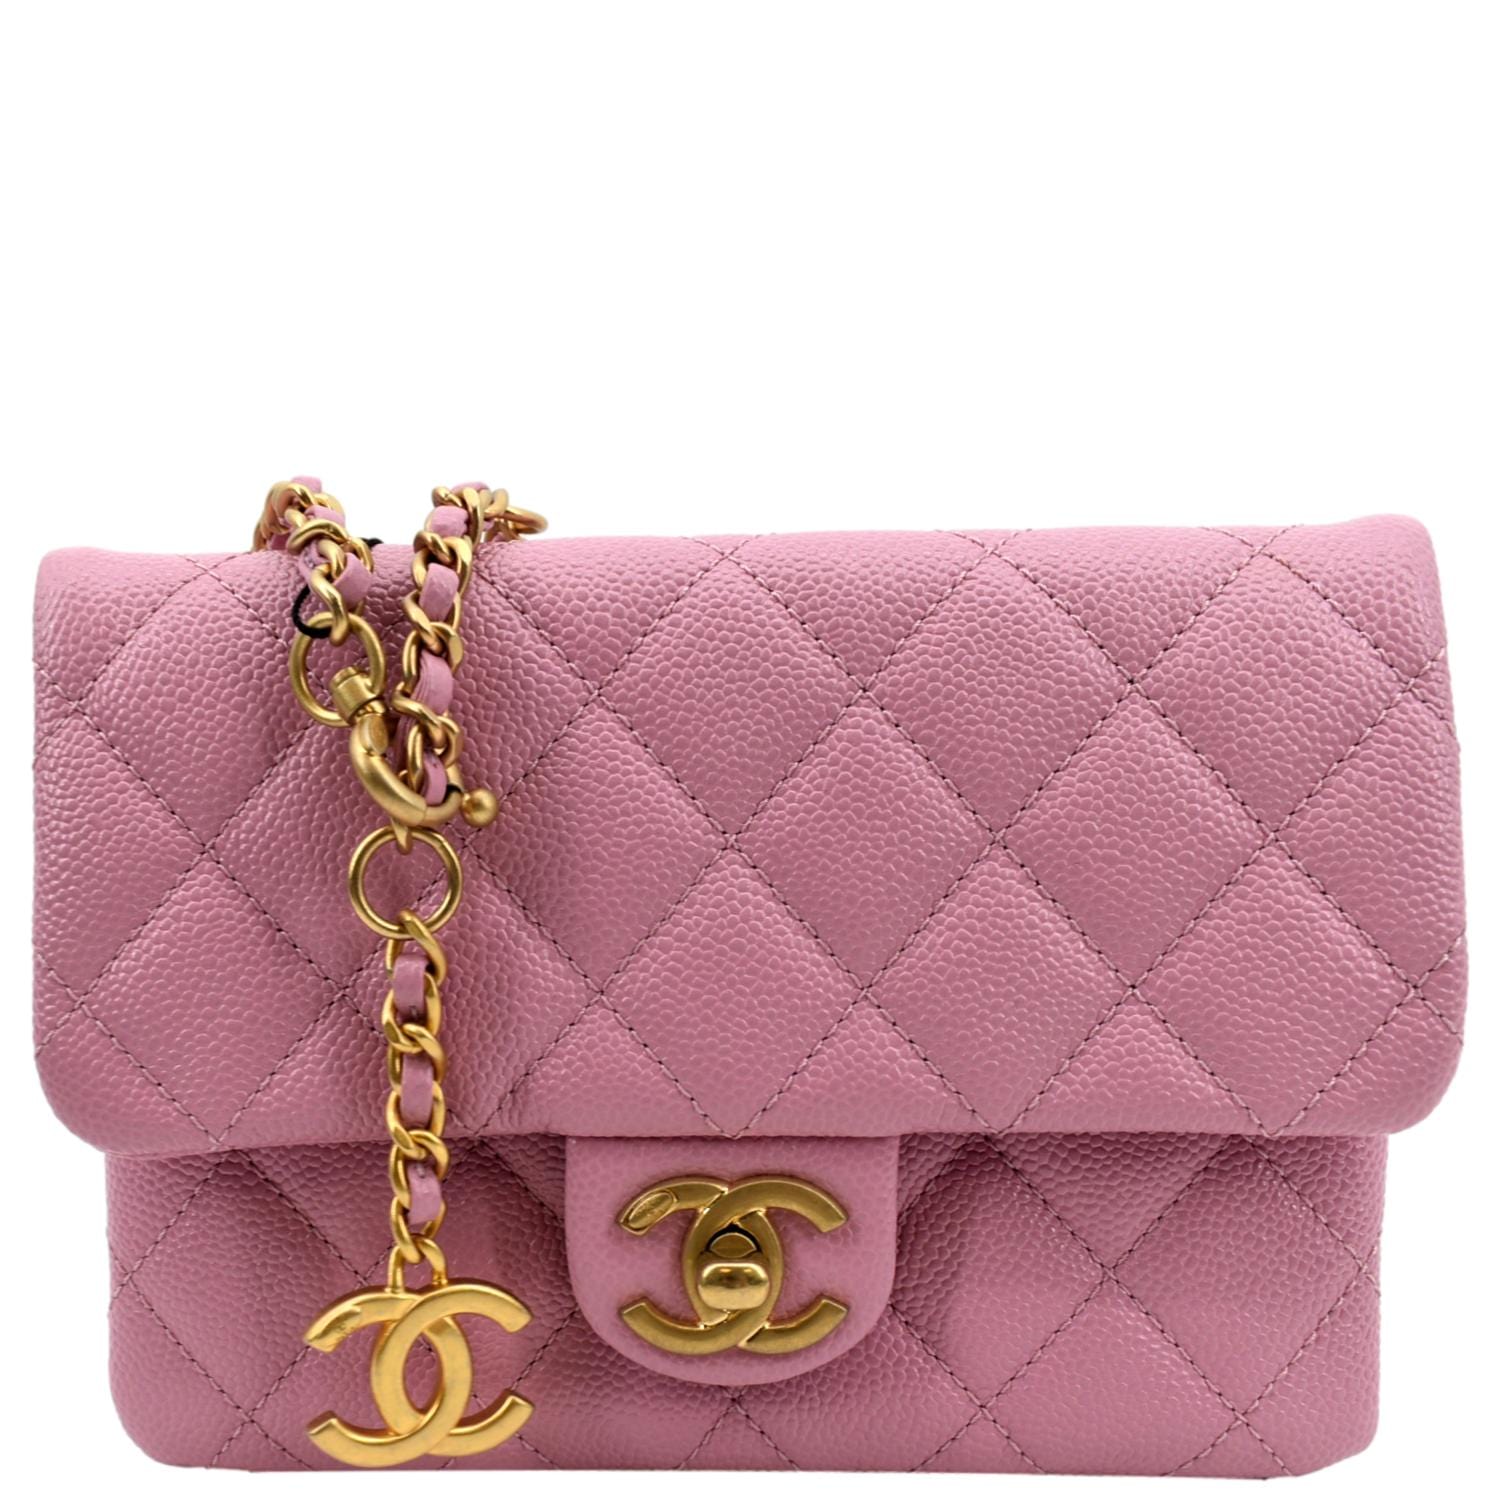 New CHANEL 22 Vanity Case Clutch Gold CHAIN Handle Pink Lambskin Pick me up  Bag  eBay